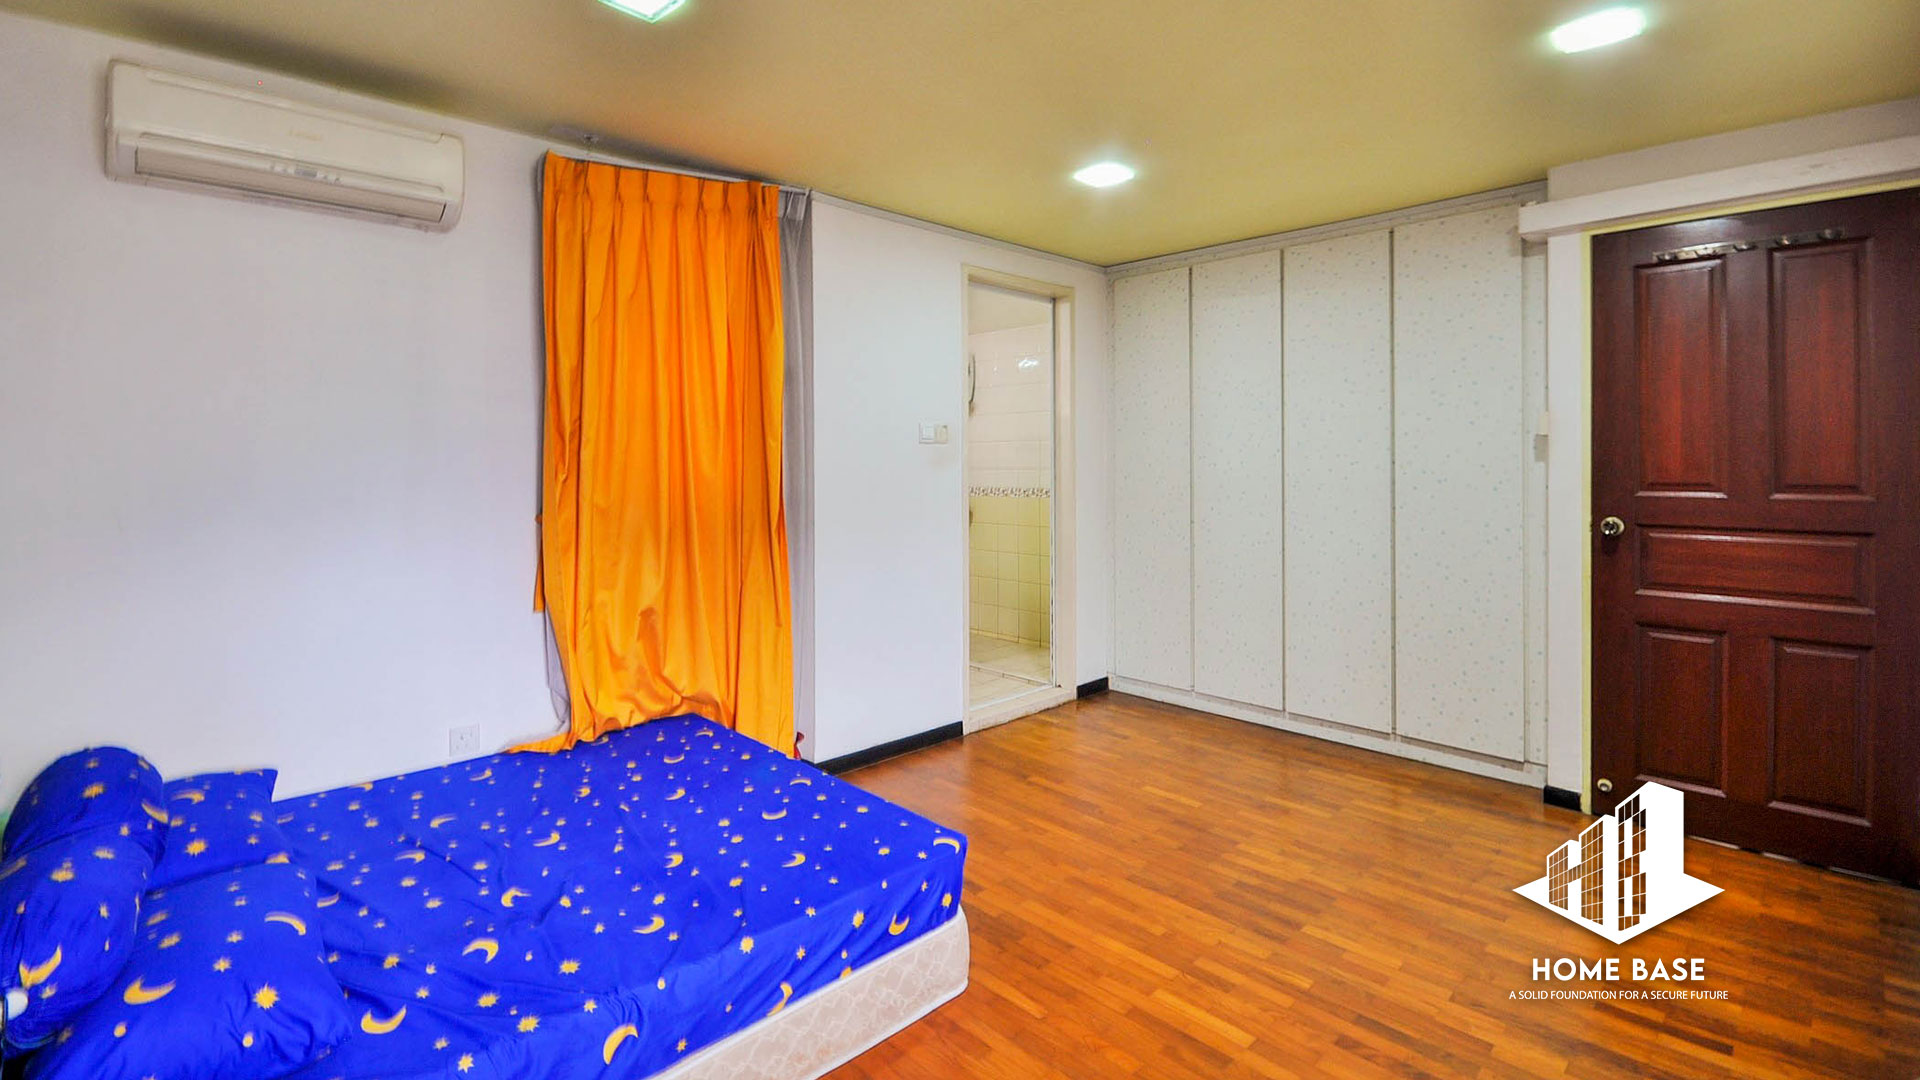 Bedroom 1 of 678D Jurong West St 64 Img 4